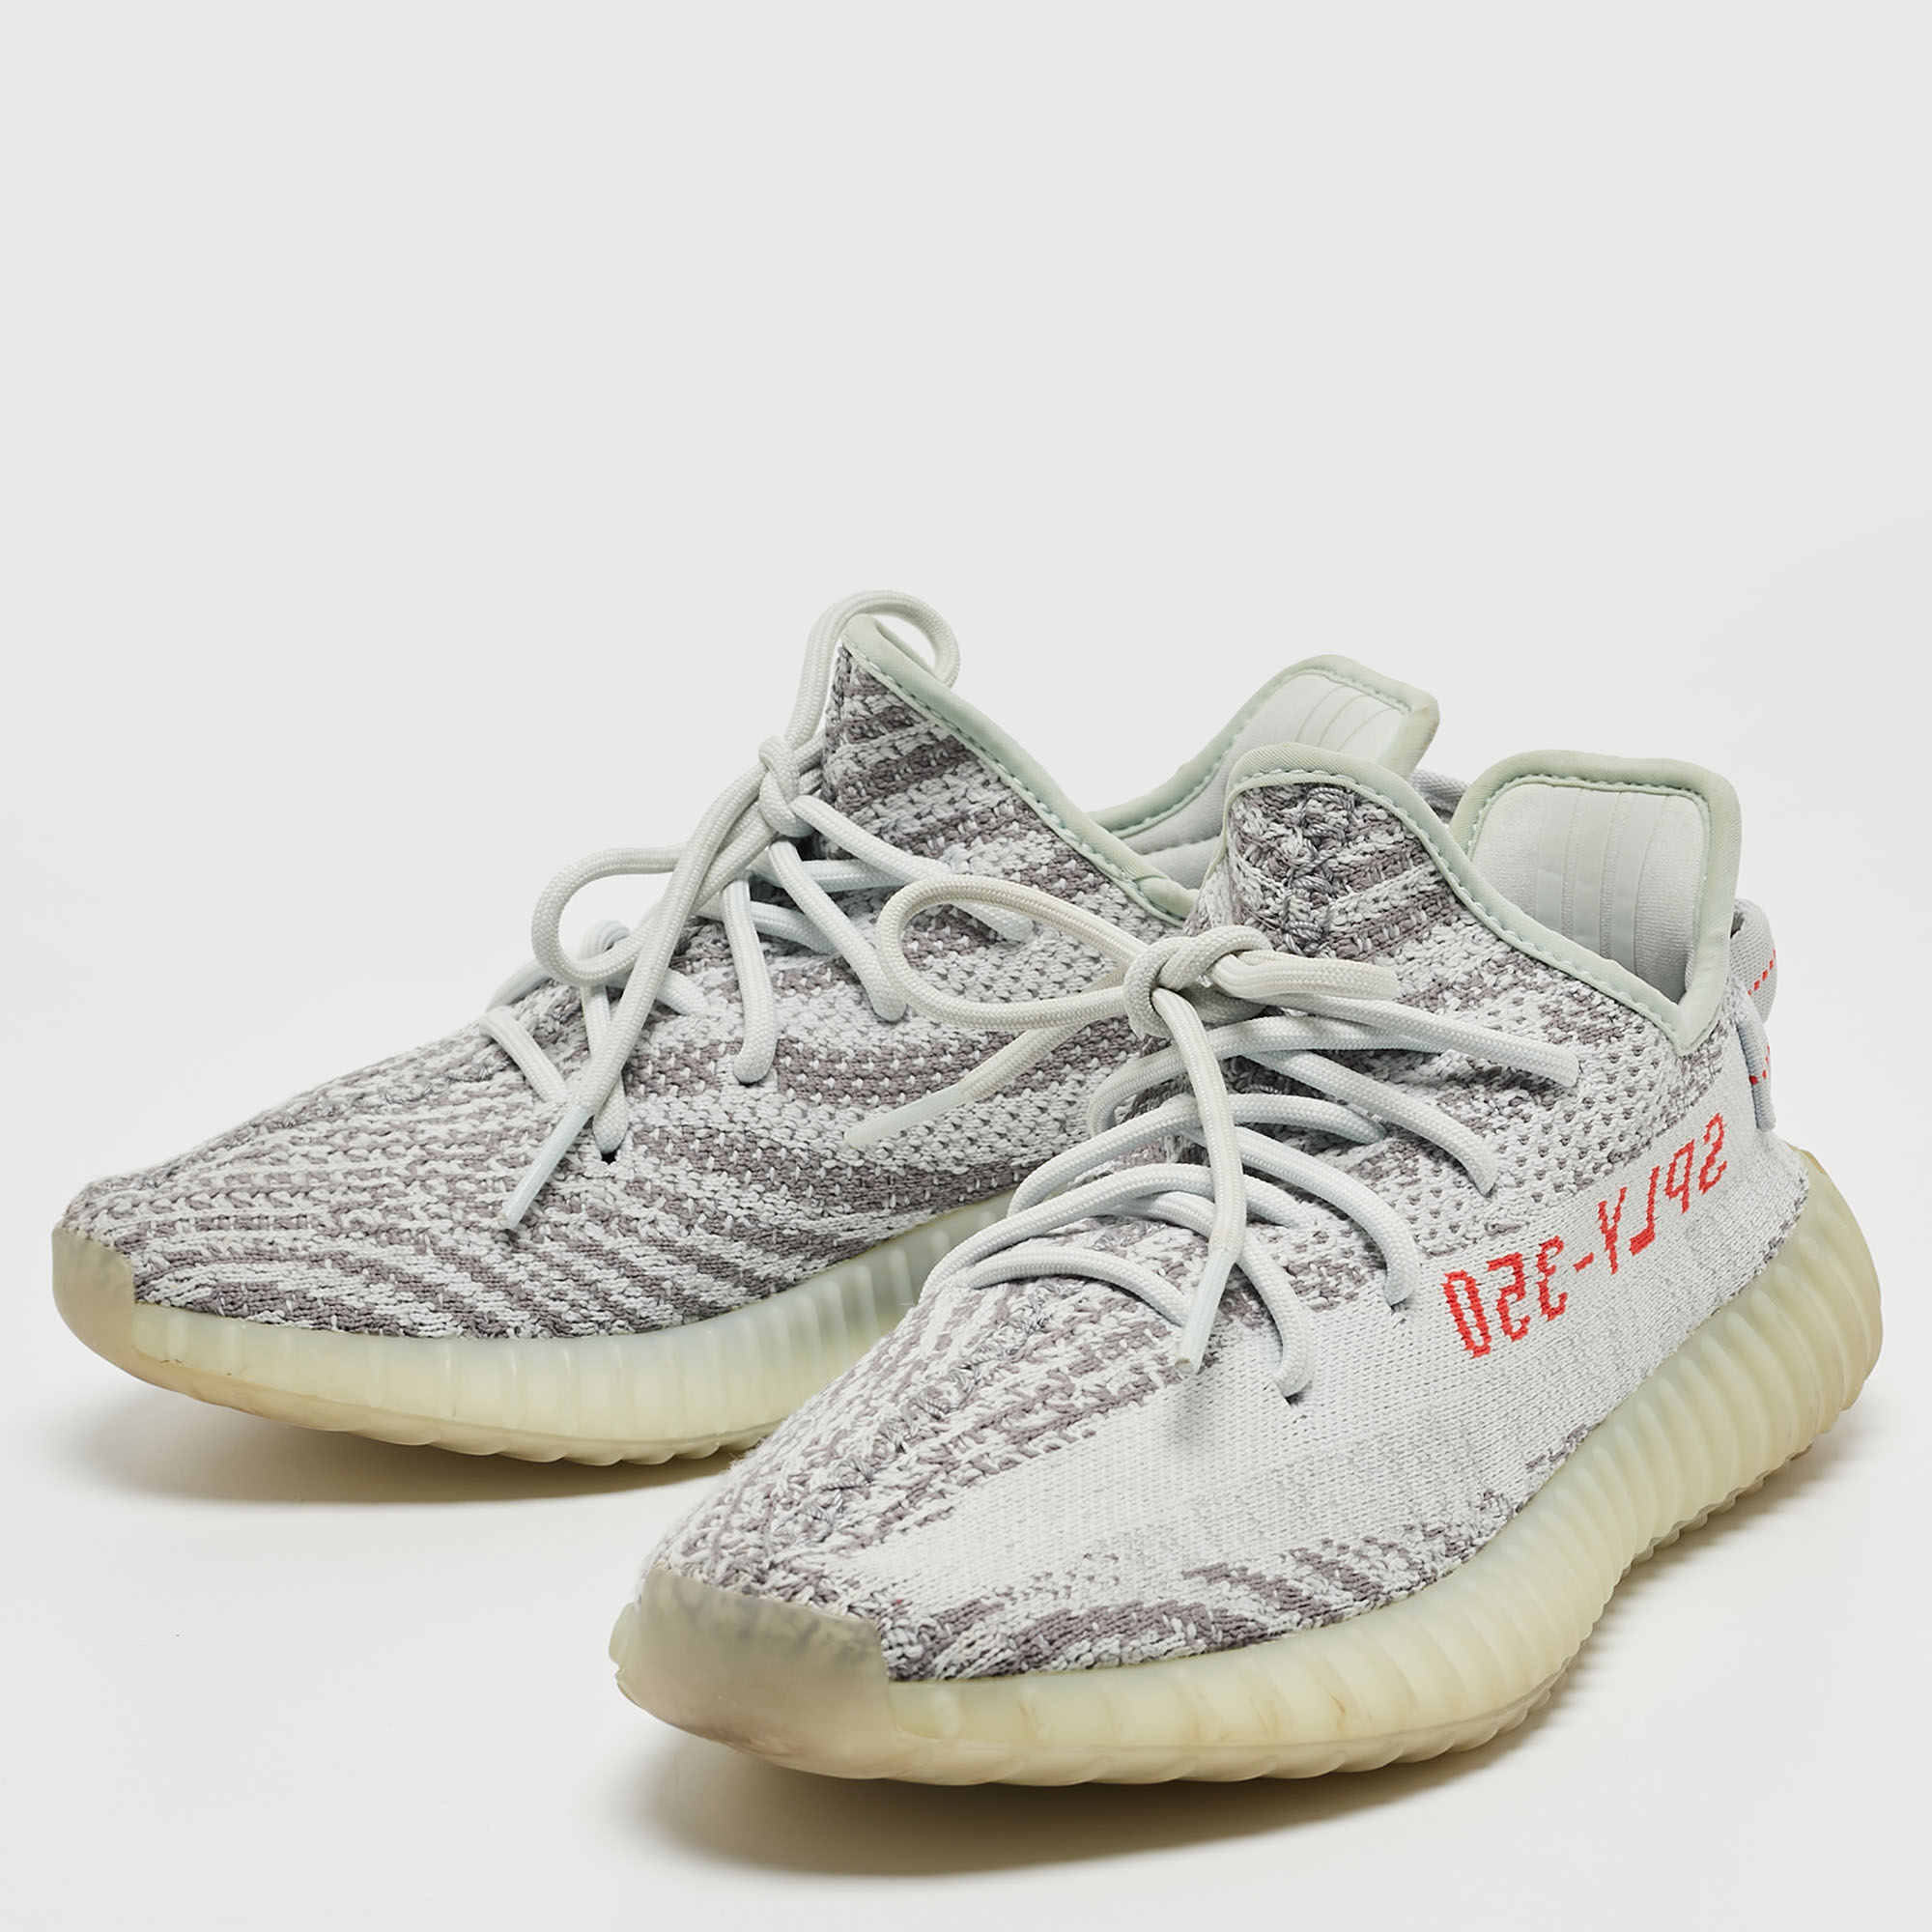 

Yeezy x Adidas Grey Knit Fabric Boost 350 V2 Blue Tint Sneakers Size 40 2/3